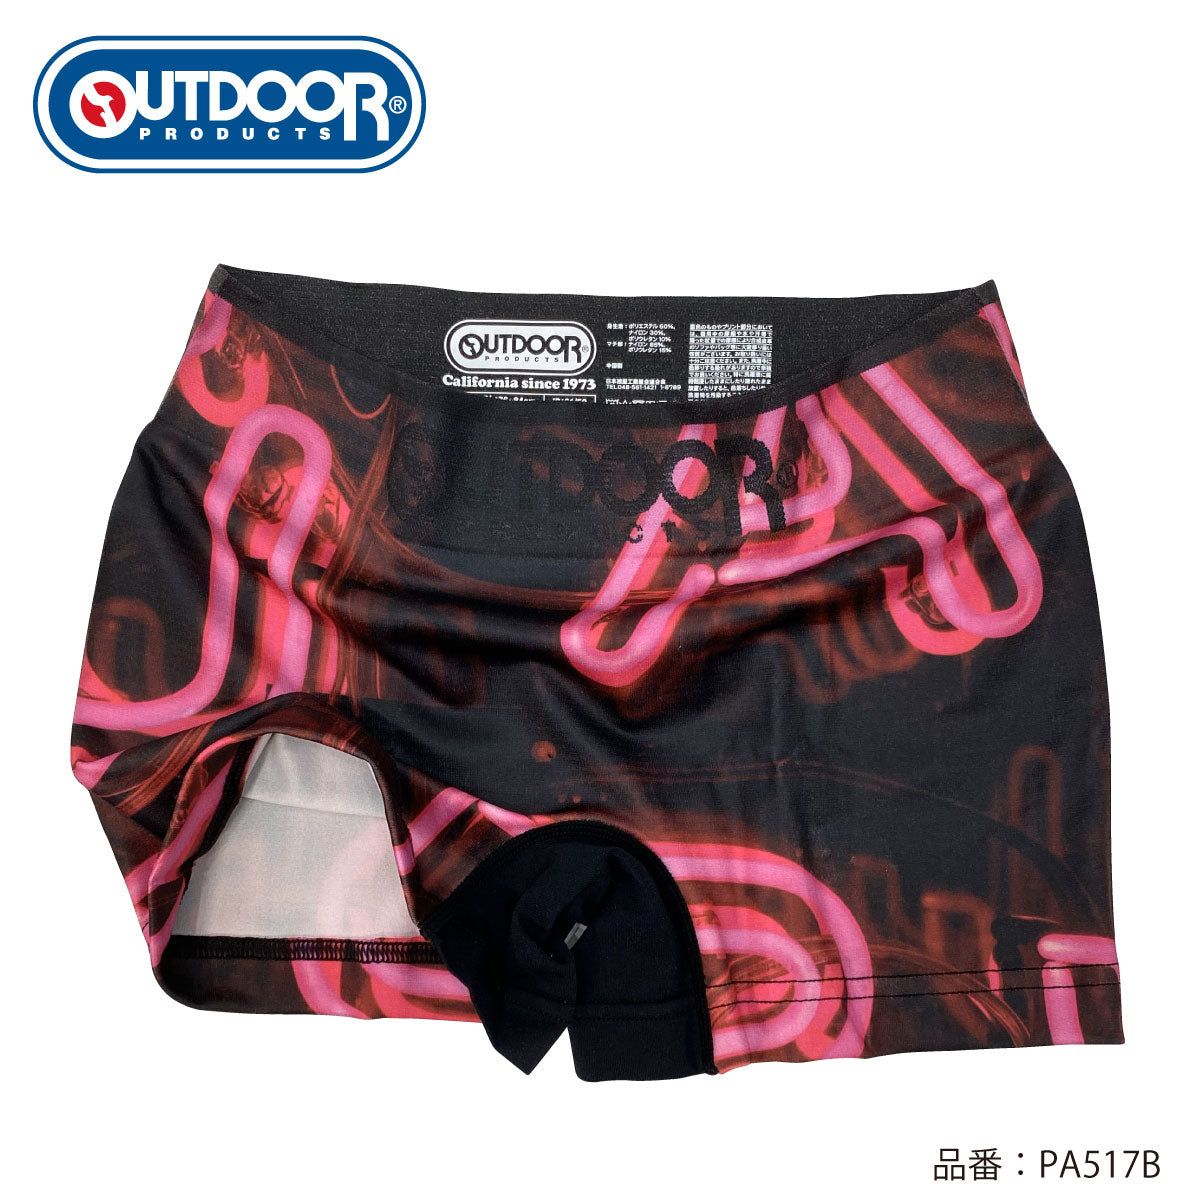 OUTDOOR Outdoor Boxer Shorts Neon Stretch Outdoor/Men's/Outdoor Boxer Shorts/Molding